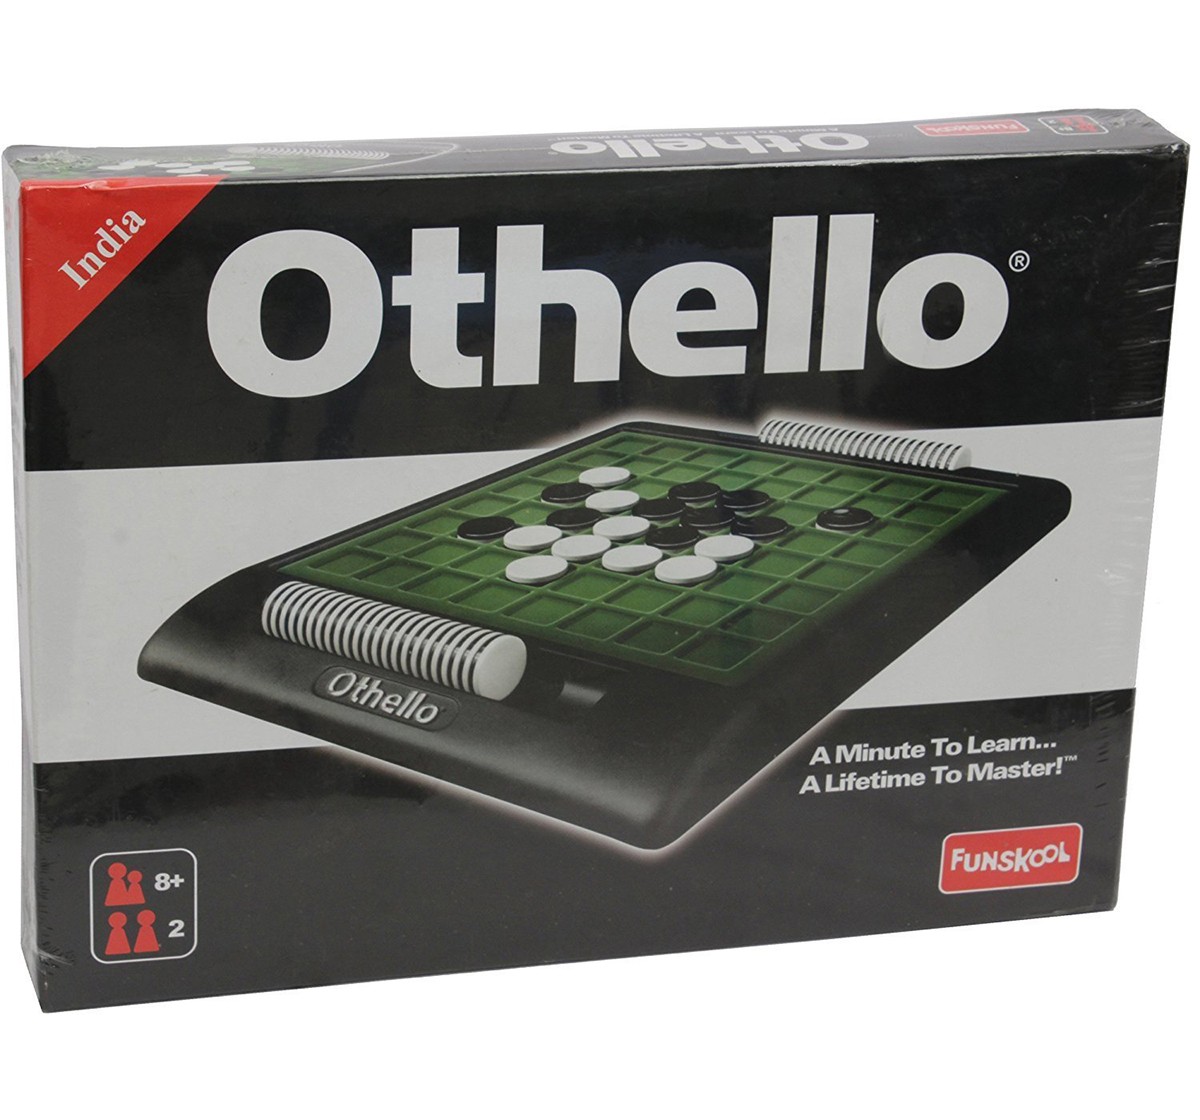 Funskool Othello Board Games for Kids age 8Y+